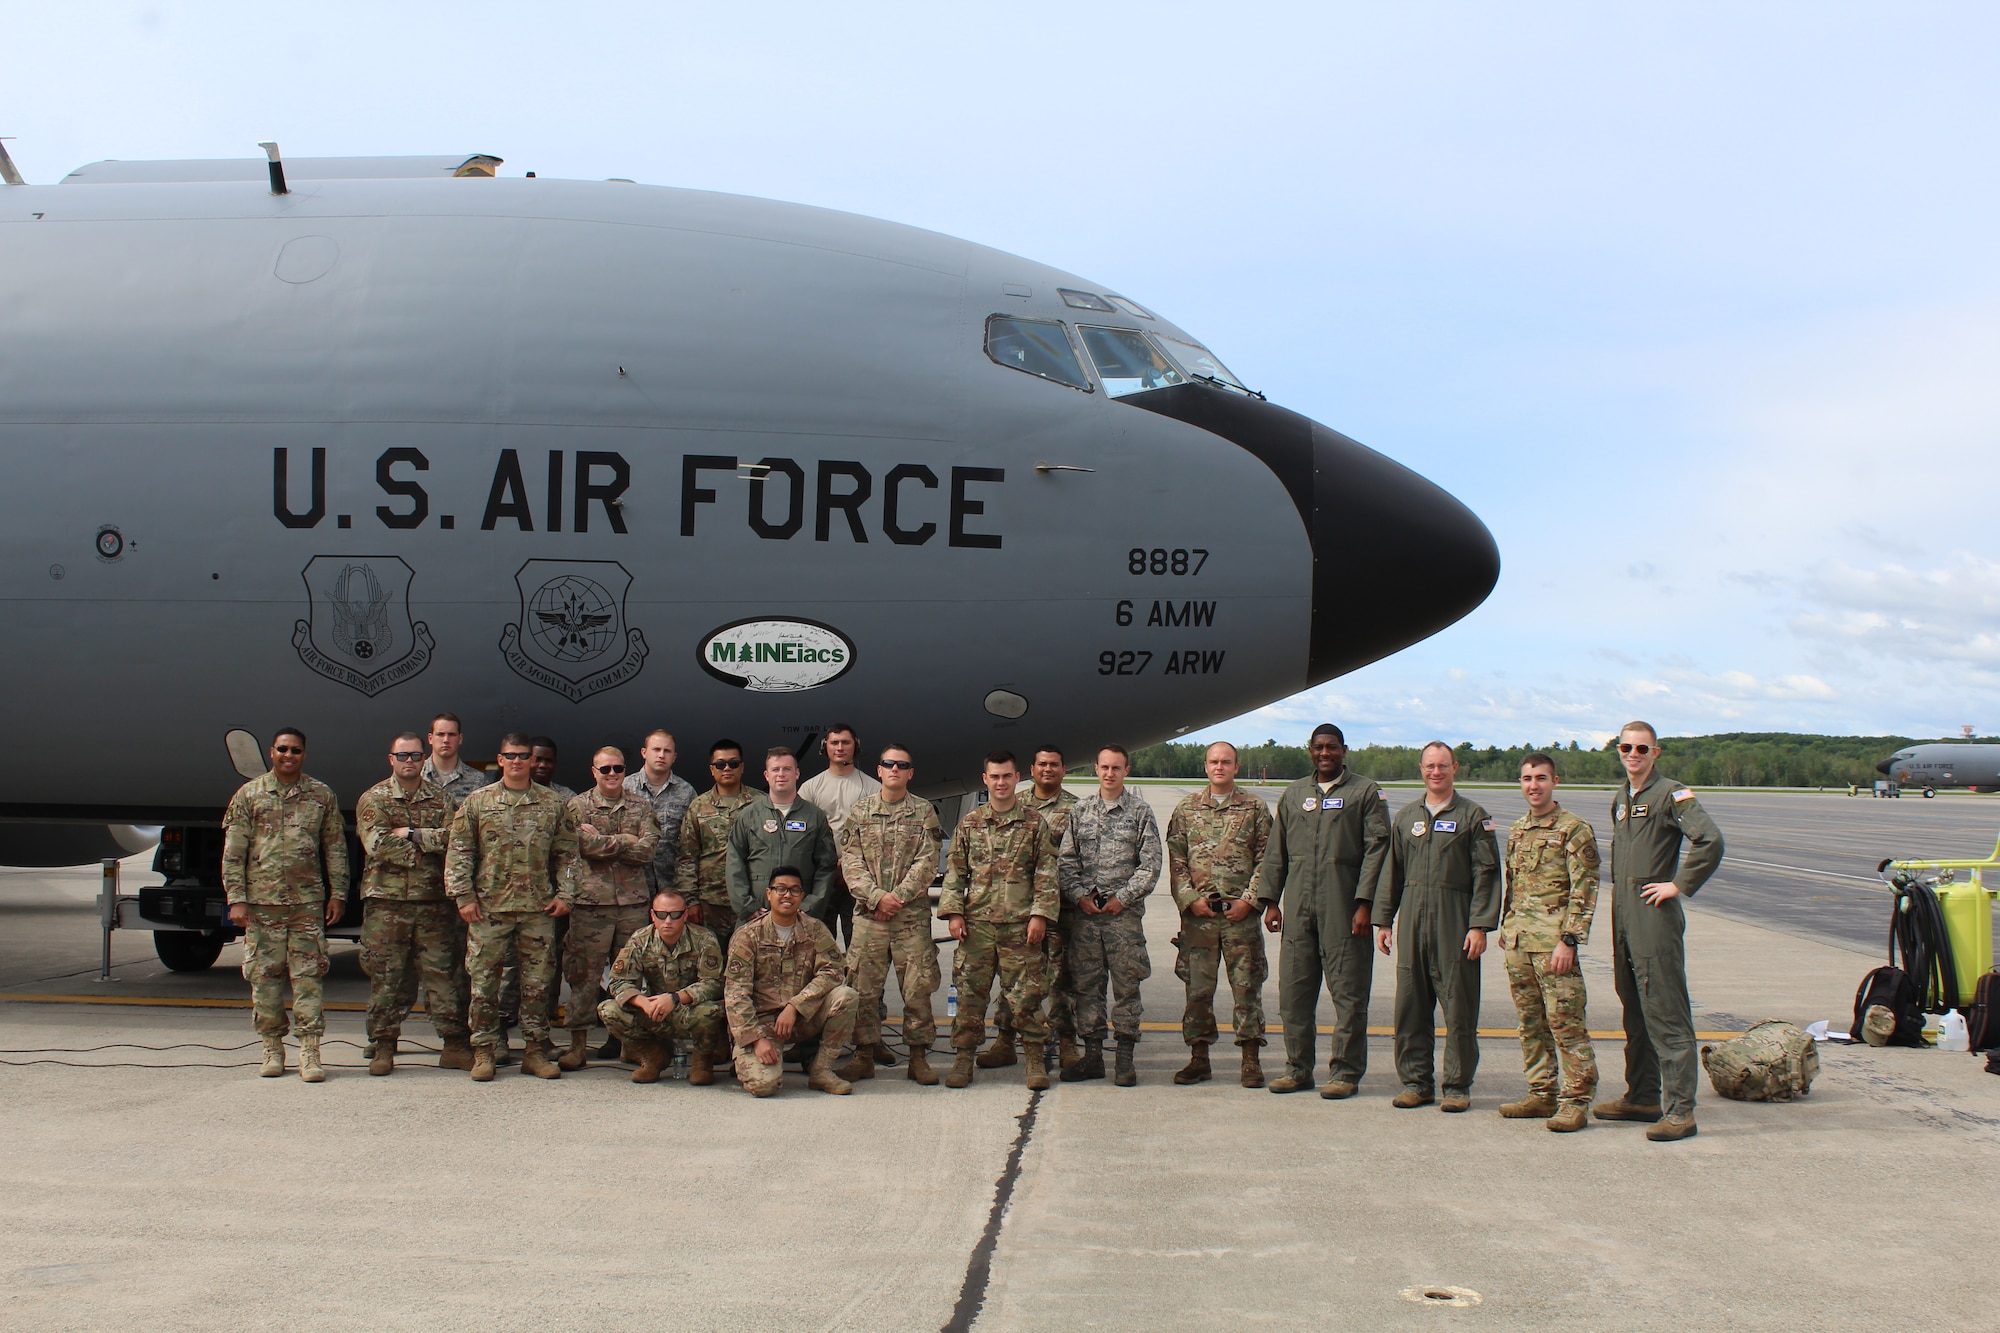 U.S. Air Force Airmen stand with a recovered KC-135 Stratotanker Aug. 4, 2018, at Bangor Air National Guard Base, Maine.